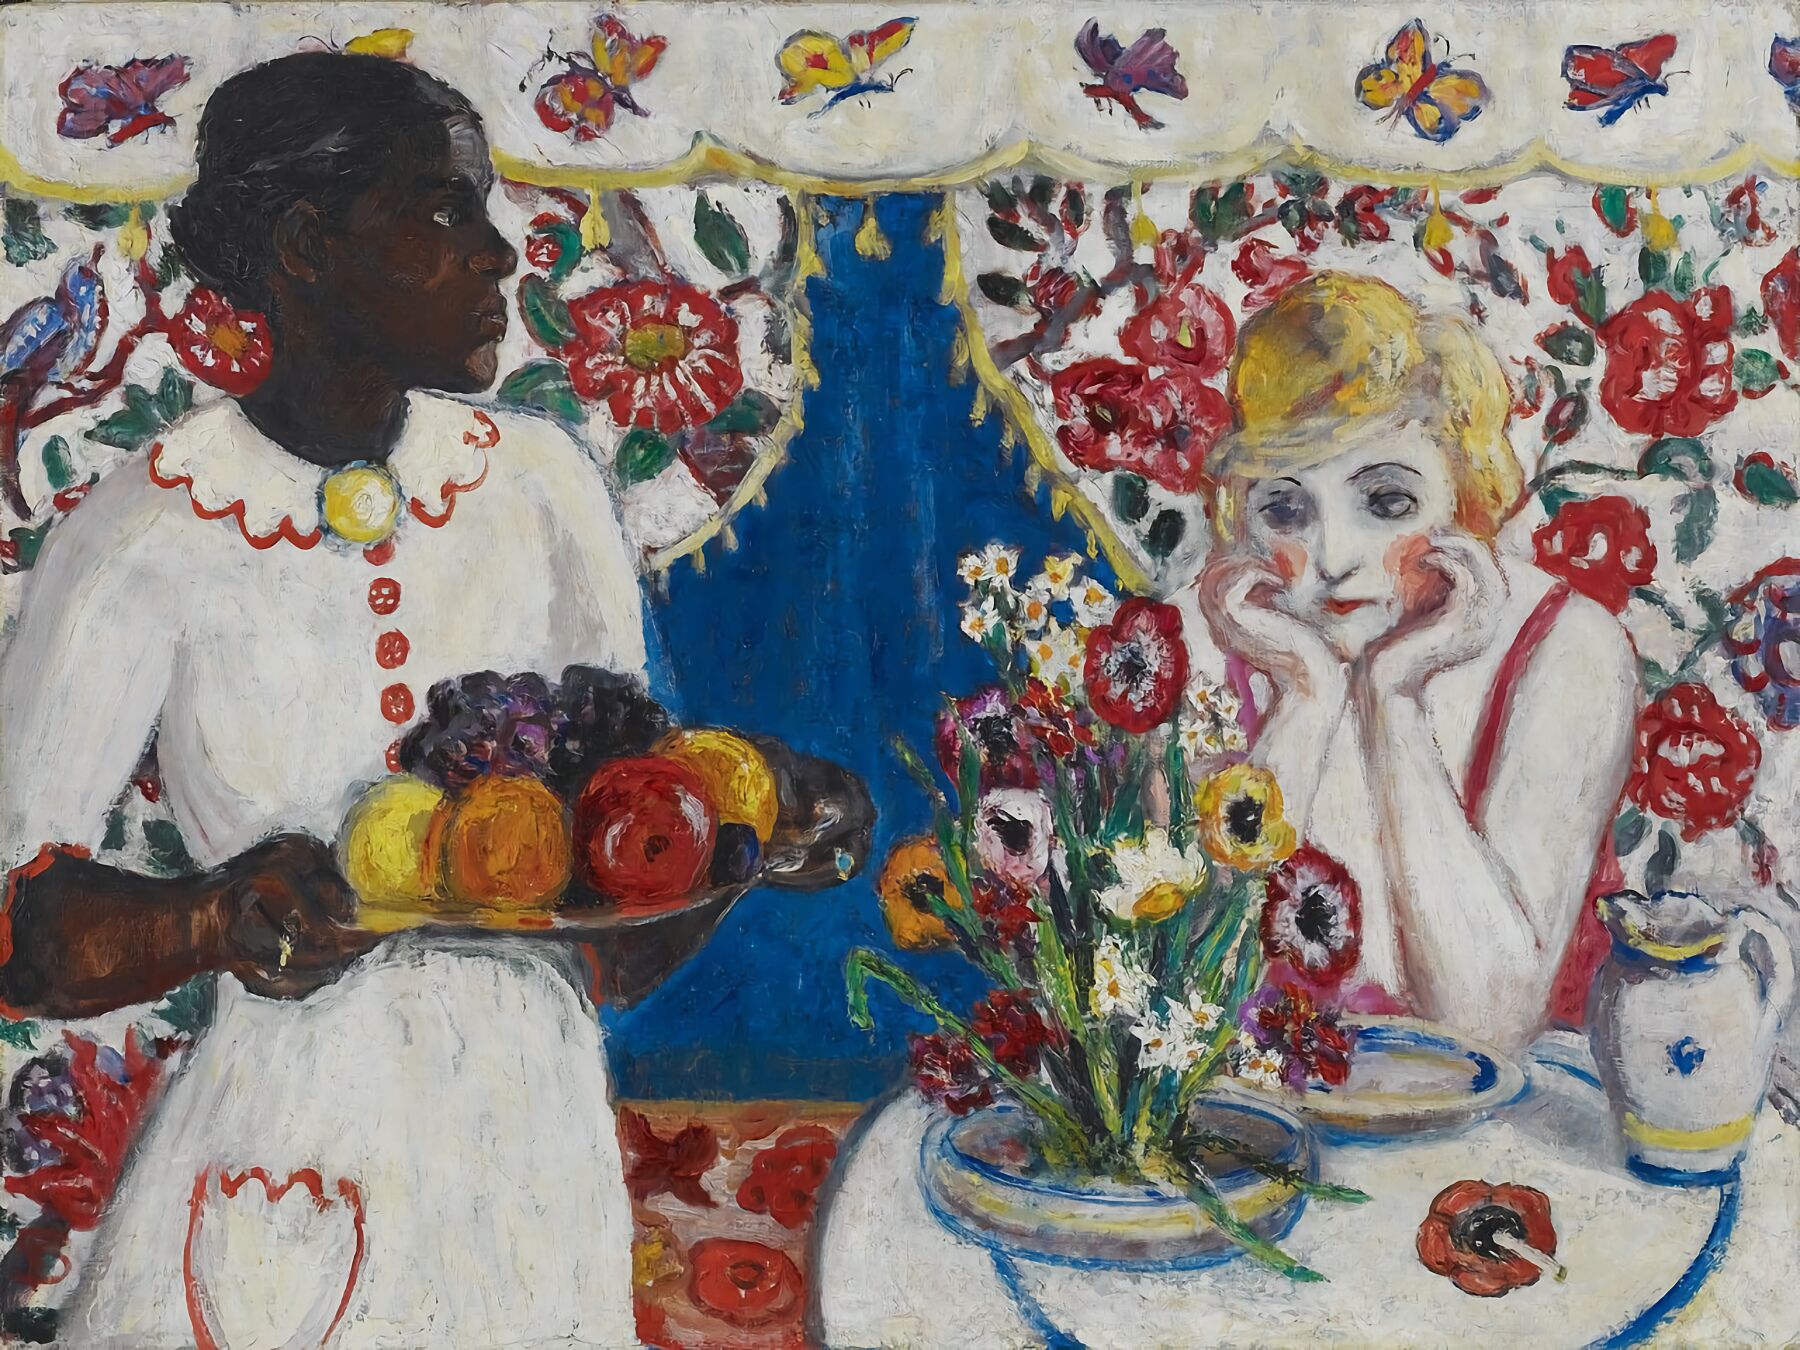 Jenny and Genevieve by Florine Stettheimer - c.1915